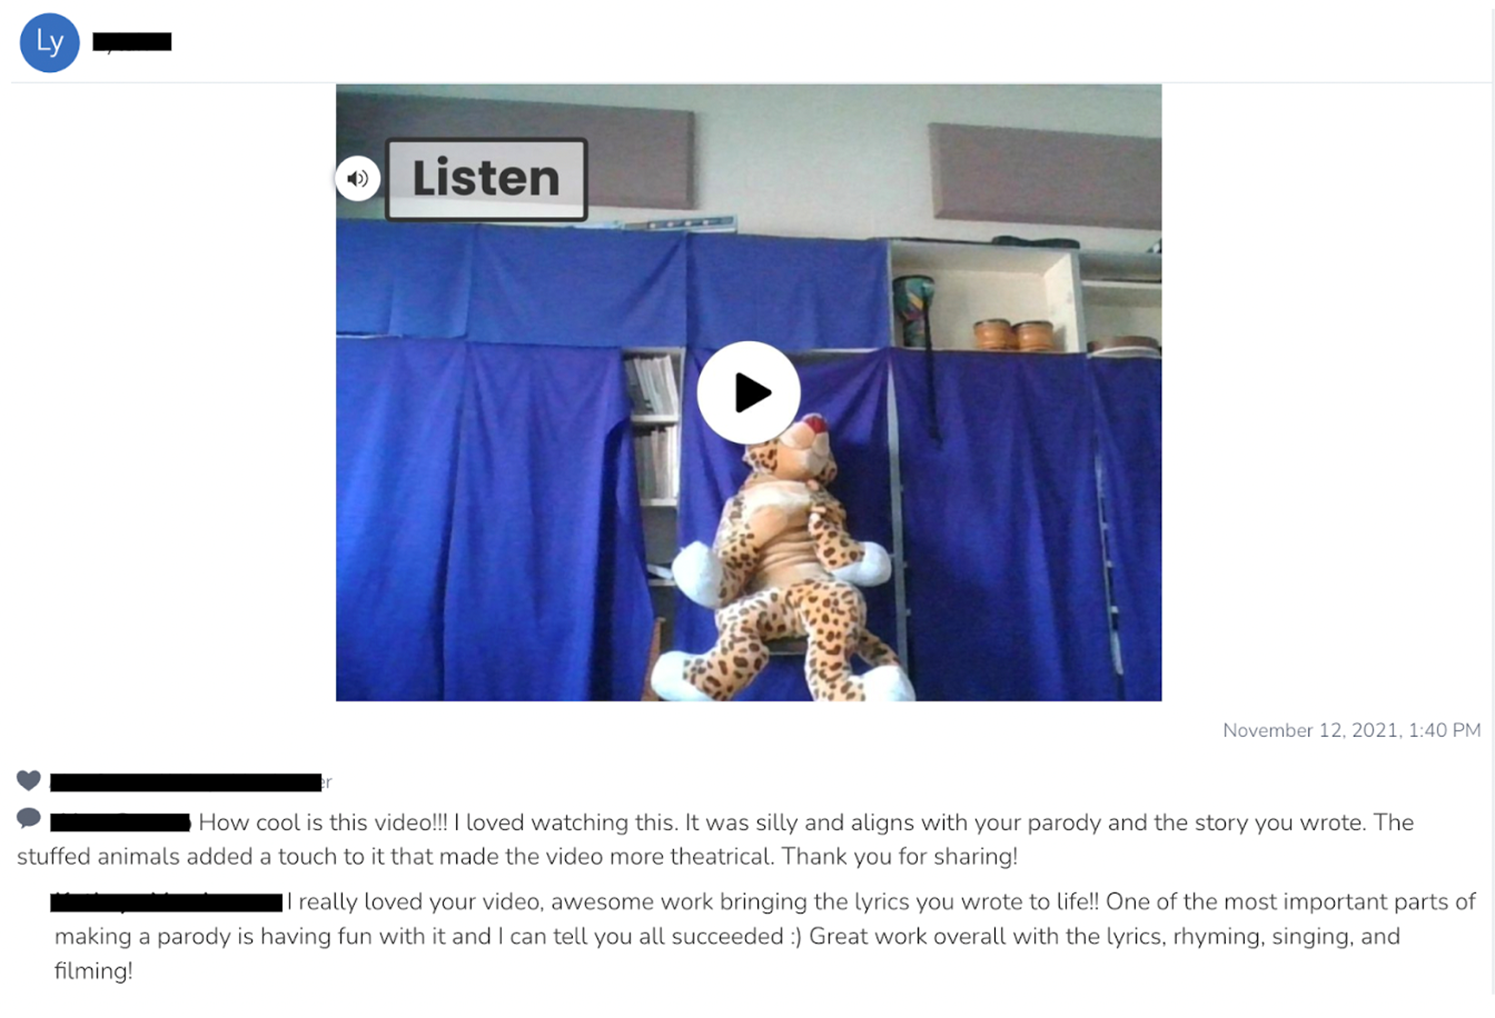 Screenshot of a video uploaded to an online learning platform. Under the video is a dialogue between a mentor and students.